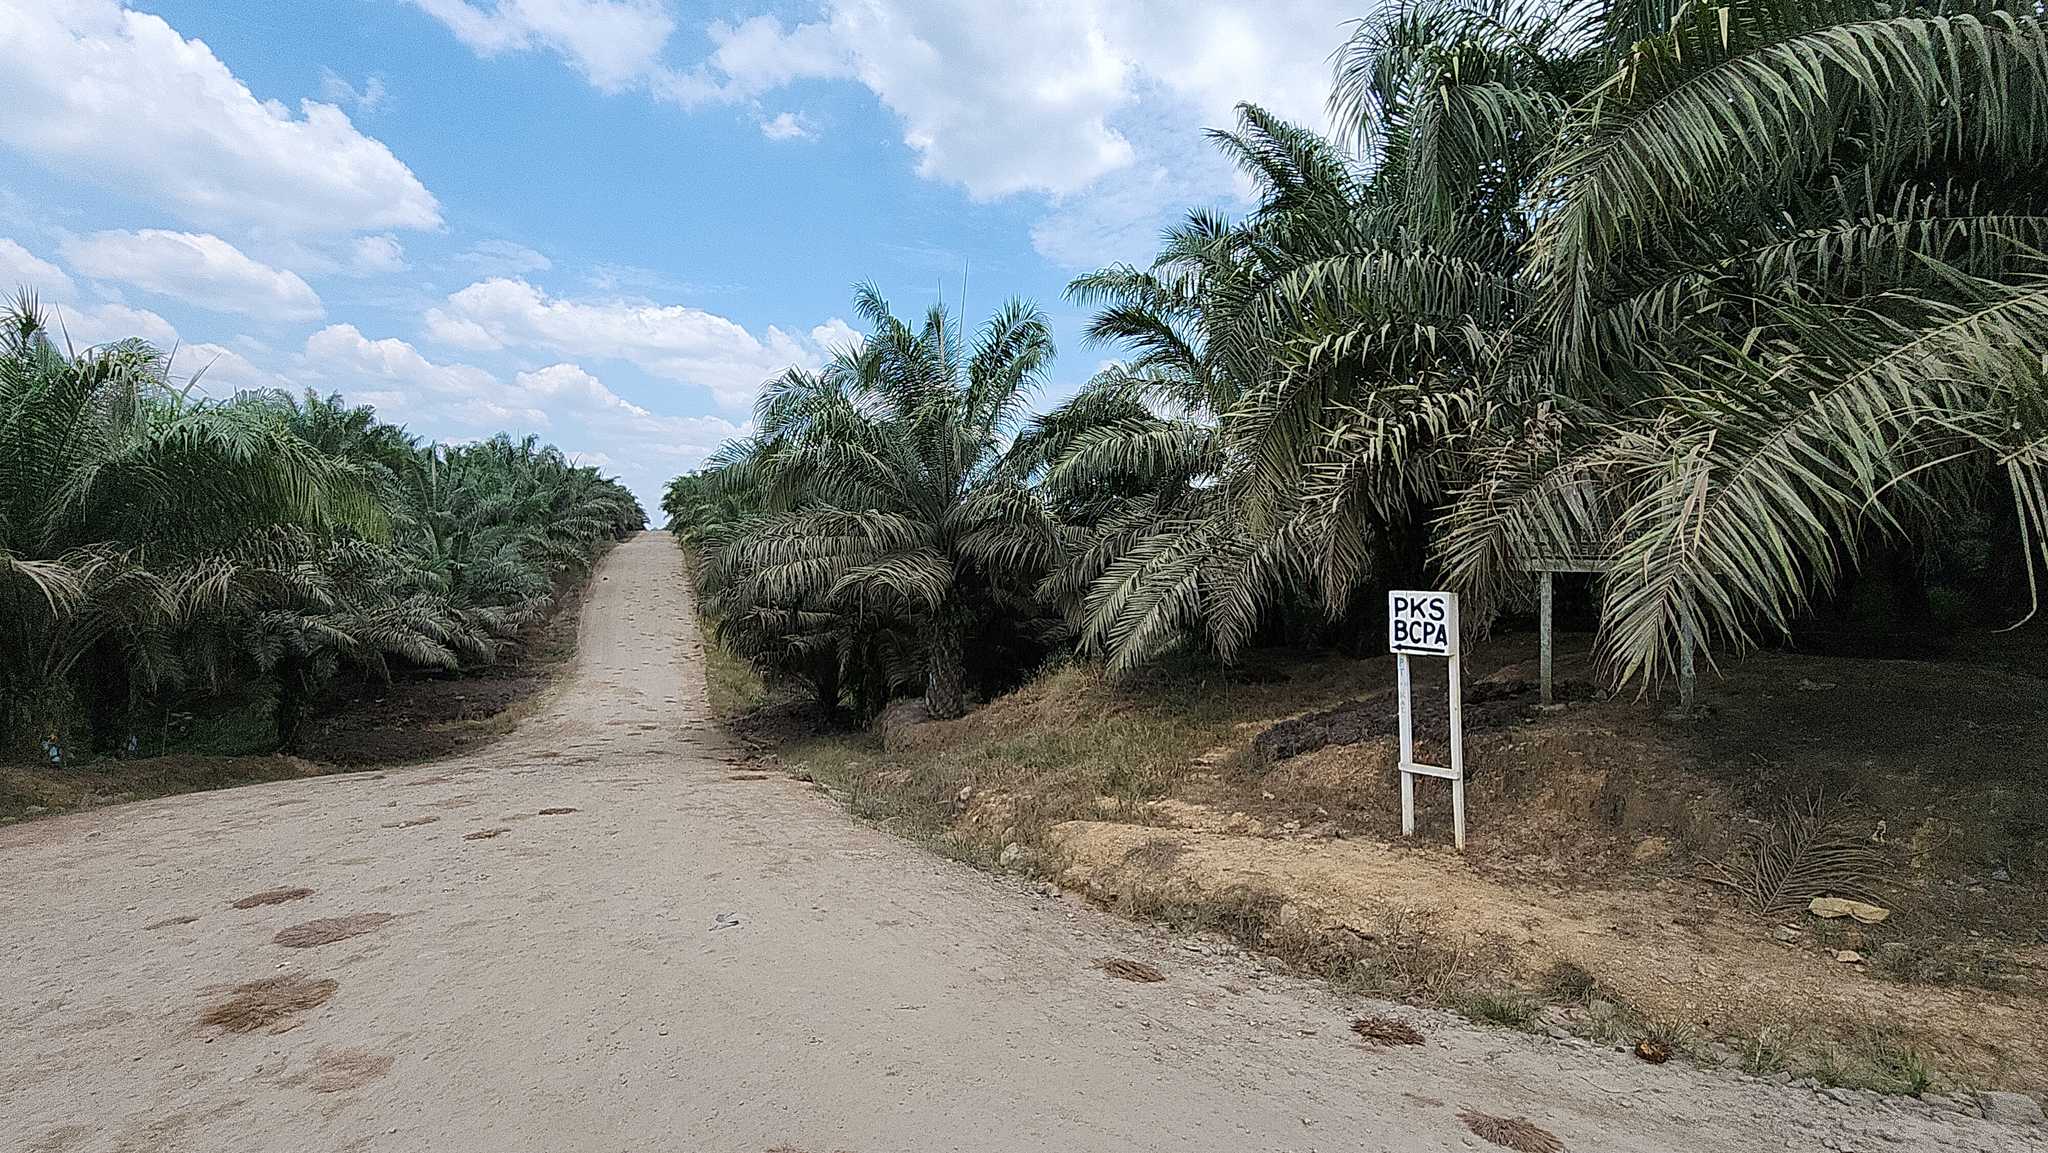 A sign within First Resources Ketapang Agro Lestari concession points to BCPA.